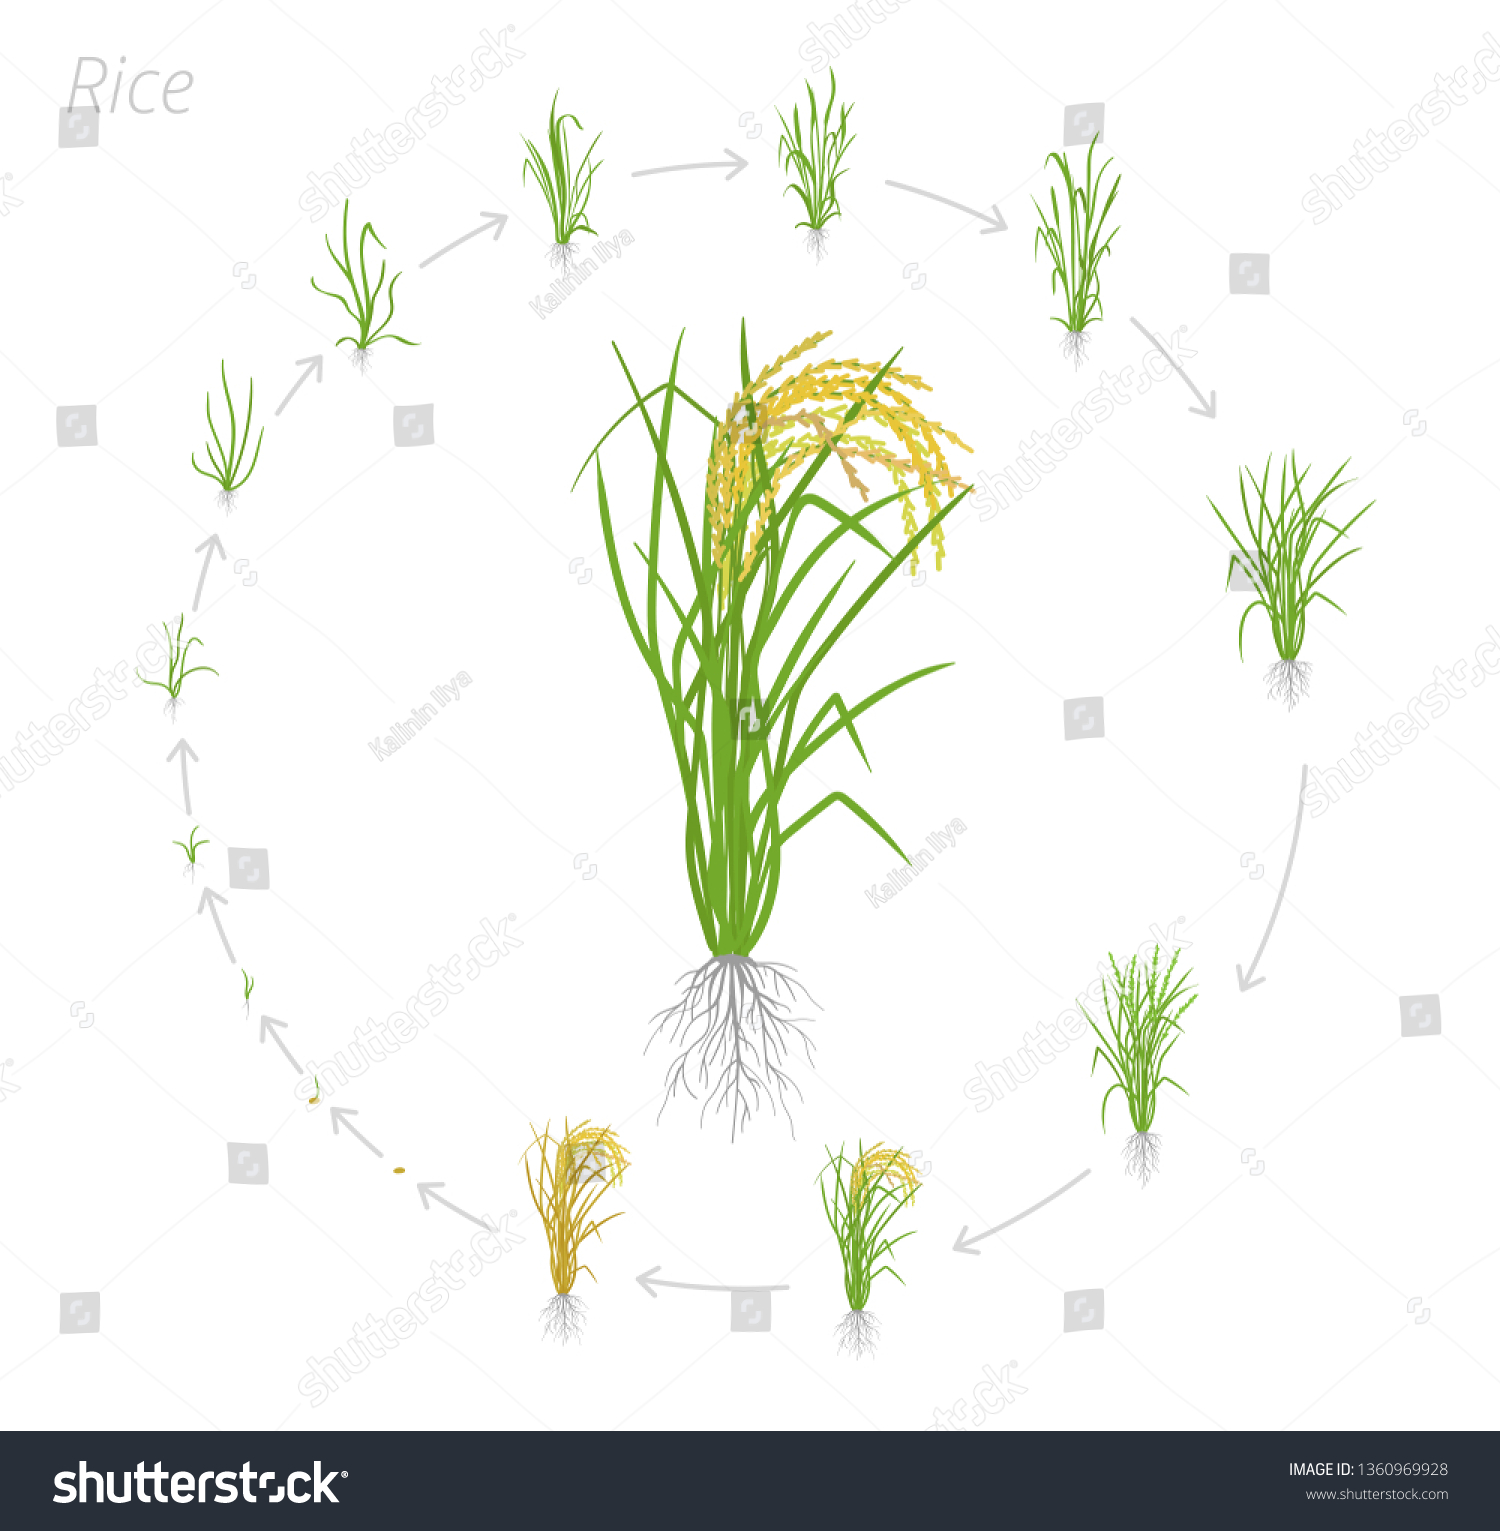 SVG of Circular life cycle of rice. Growth stages of rice plant. Rice increase phases. Vector illustration. Oryza sativa. Ripening period. svg